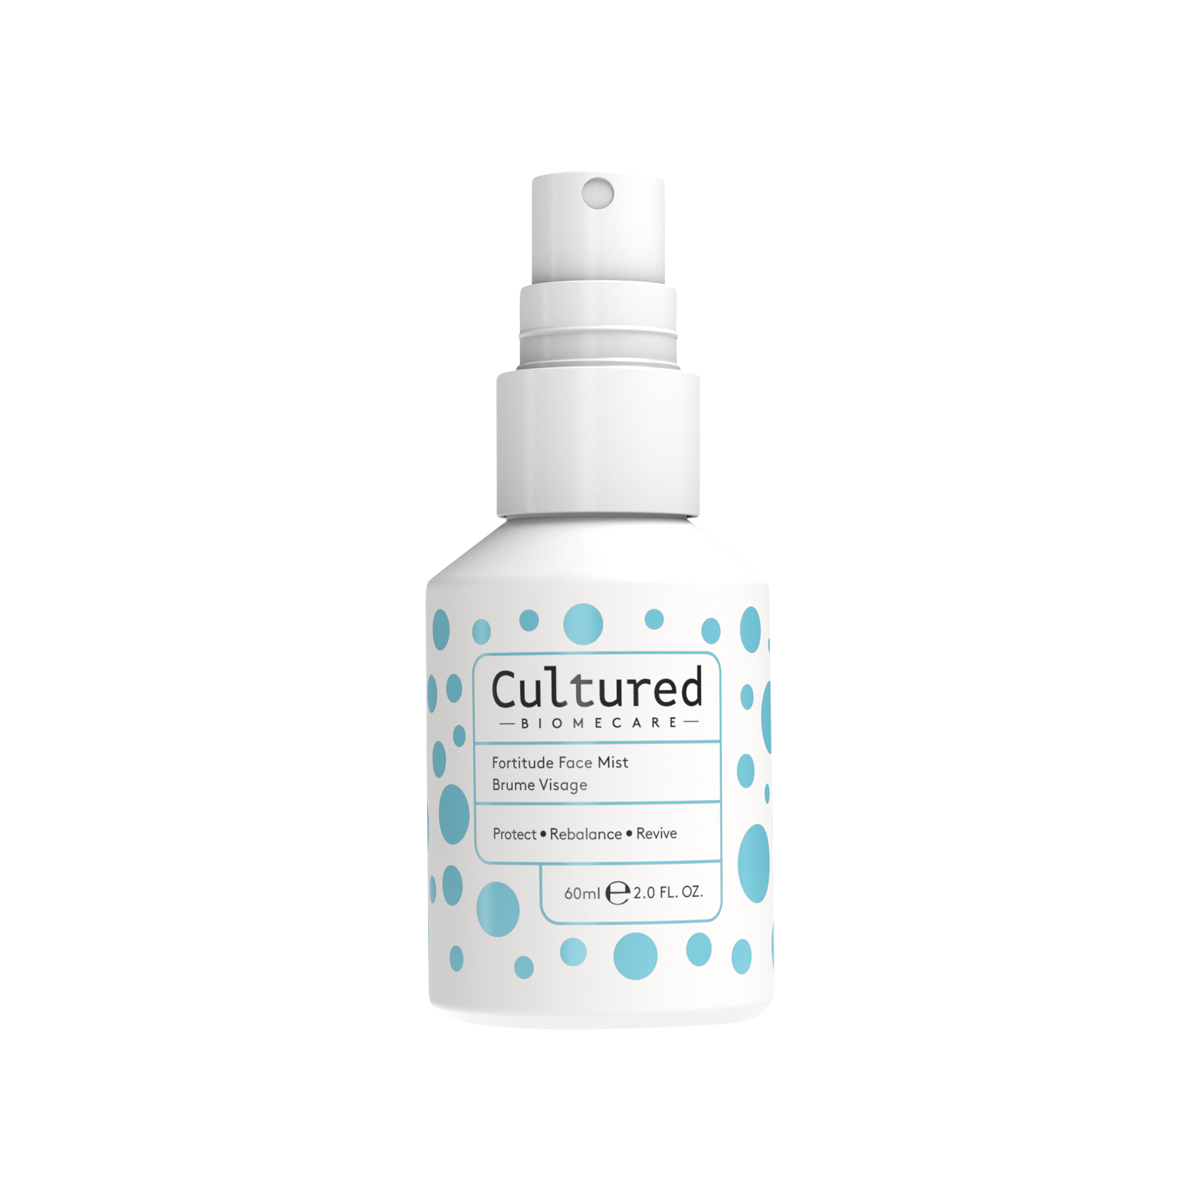 Cultured - Fortitude Face Mist